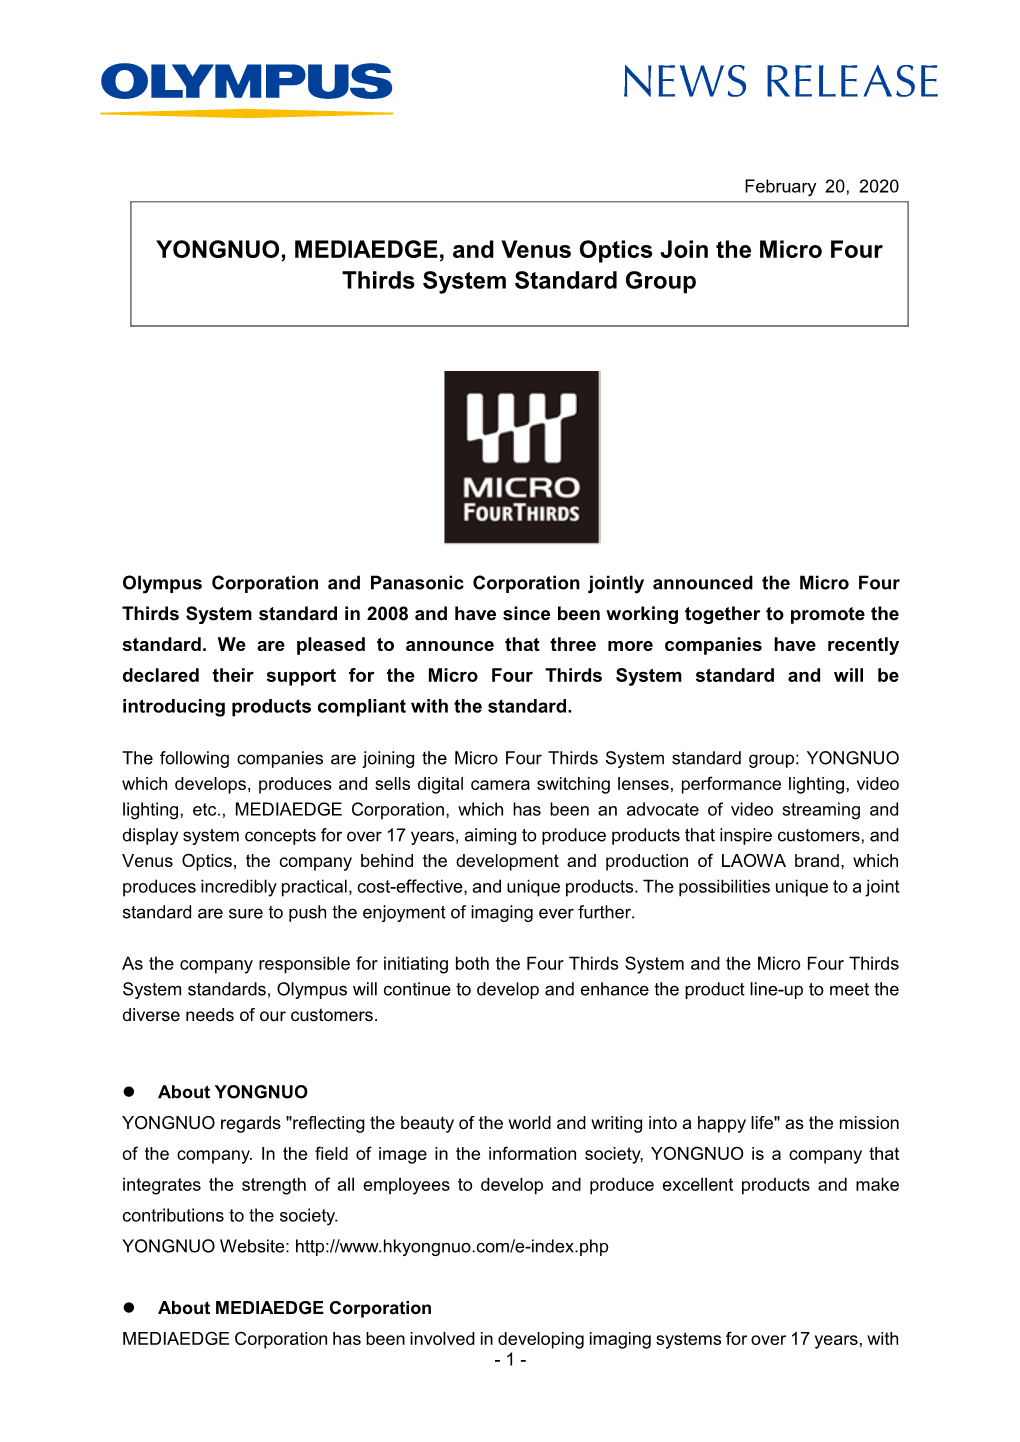 YONGNUO, MEDIAEDGE, and Venus Optics Join the Micro Four Thirds System Standard Group